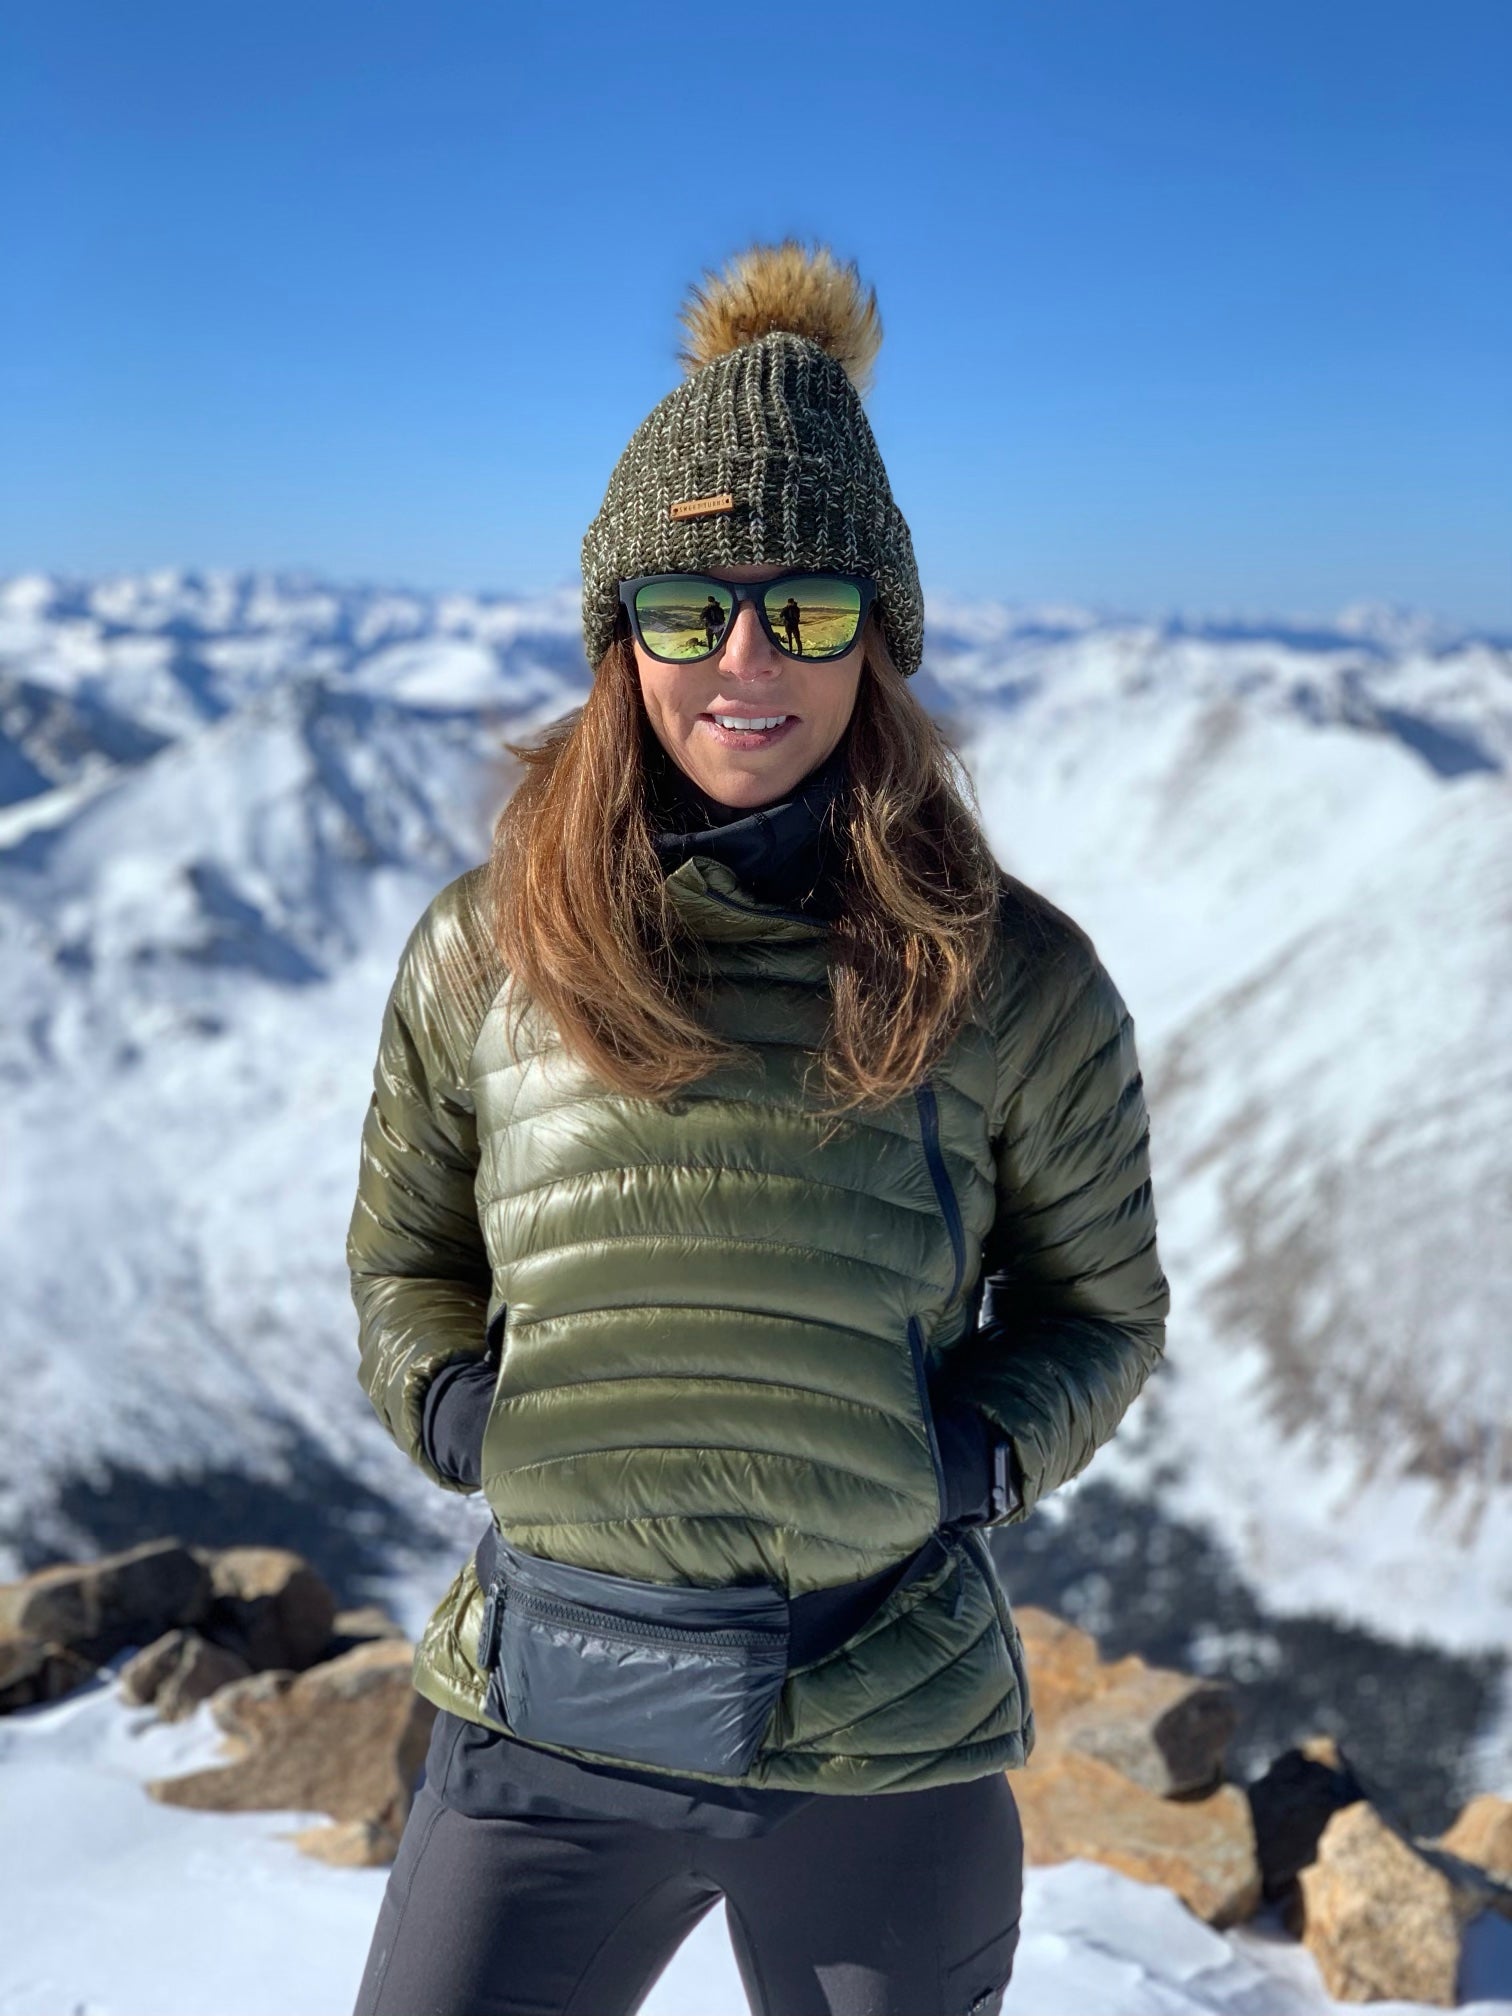 Smiling woman standing at top of snowcapped mountain wearing a fanny pack